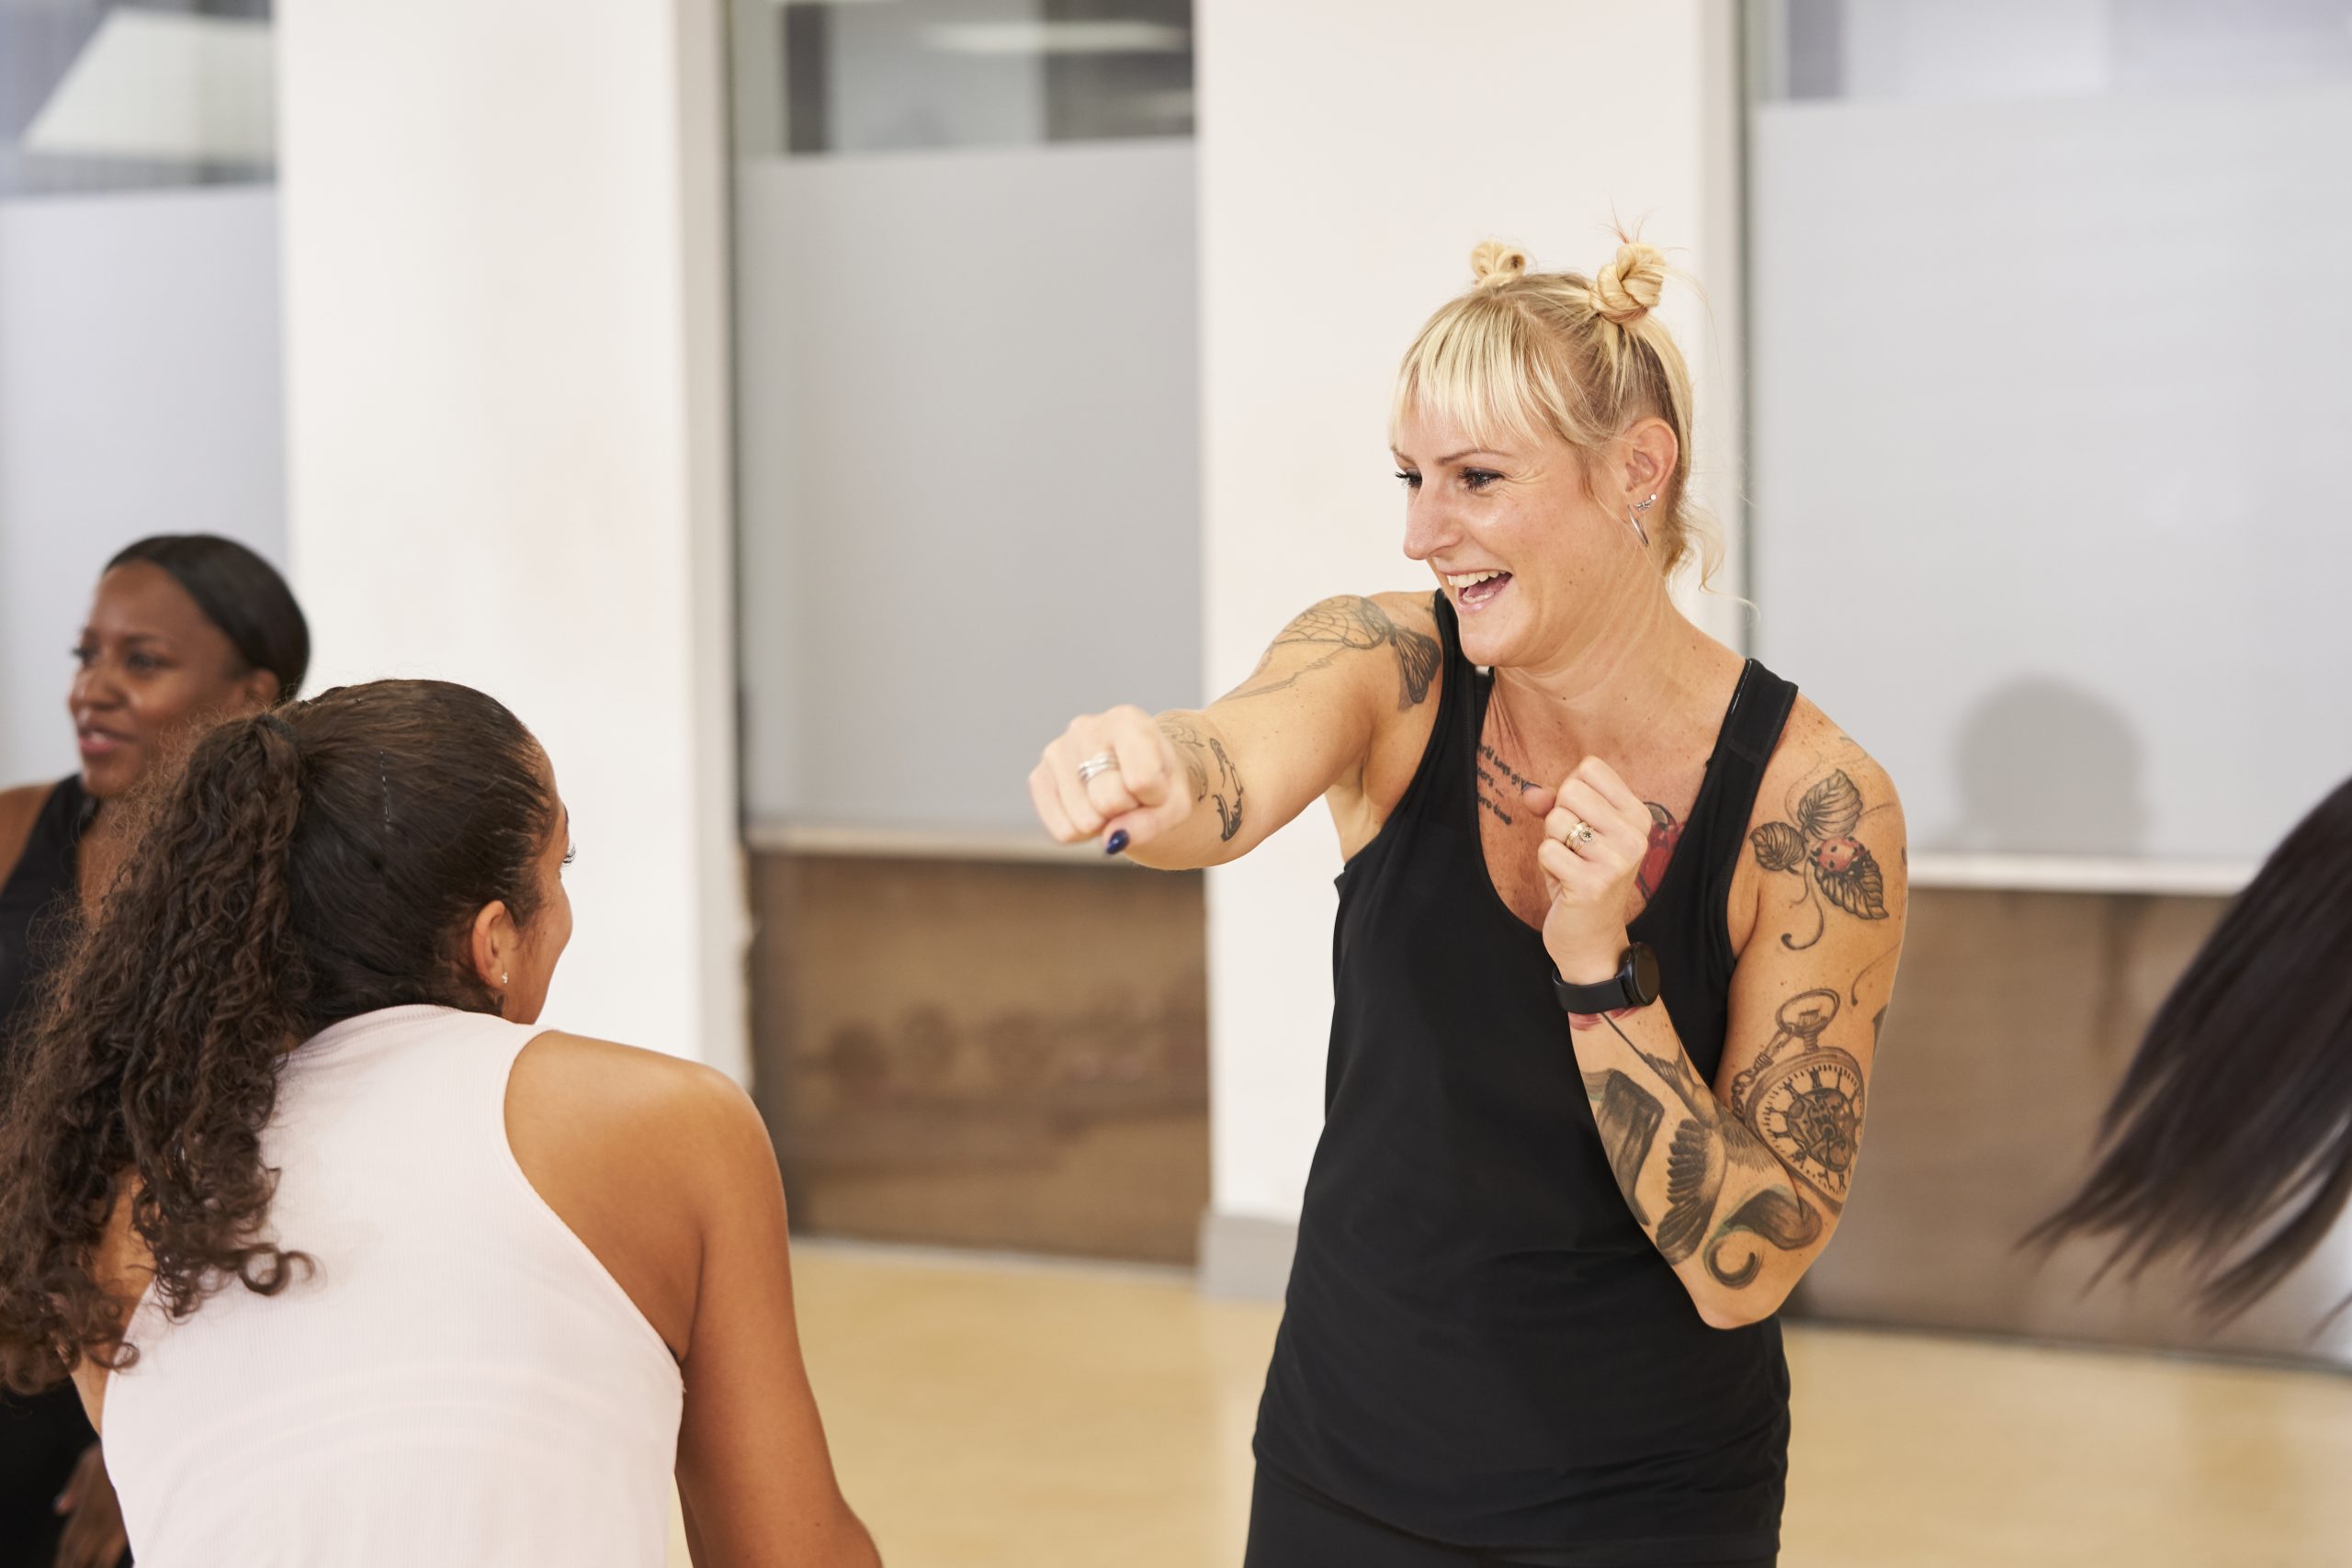 A white woman with tattoos boxing